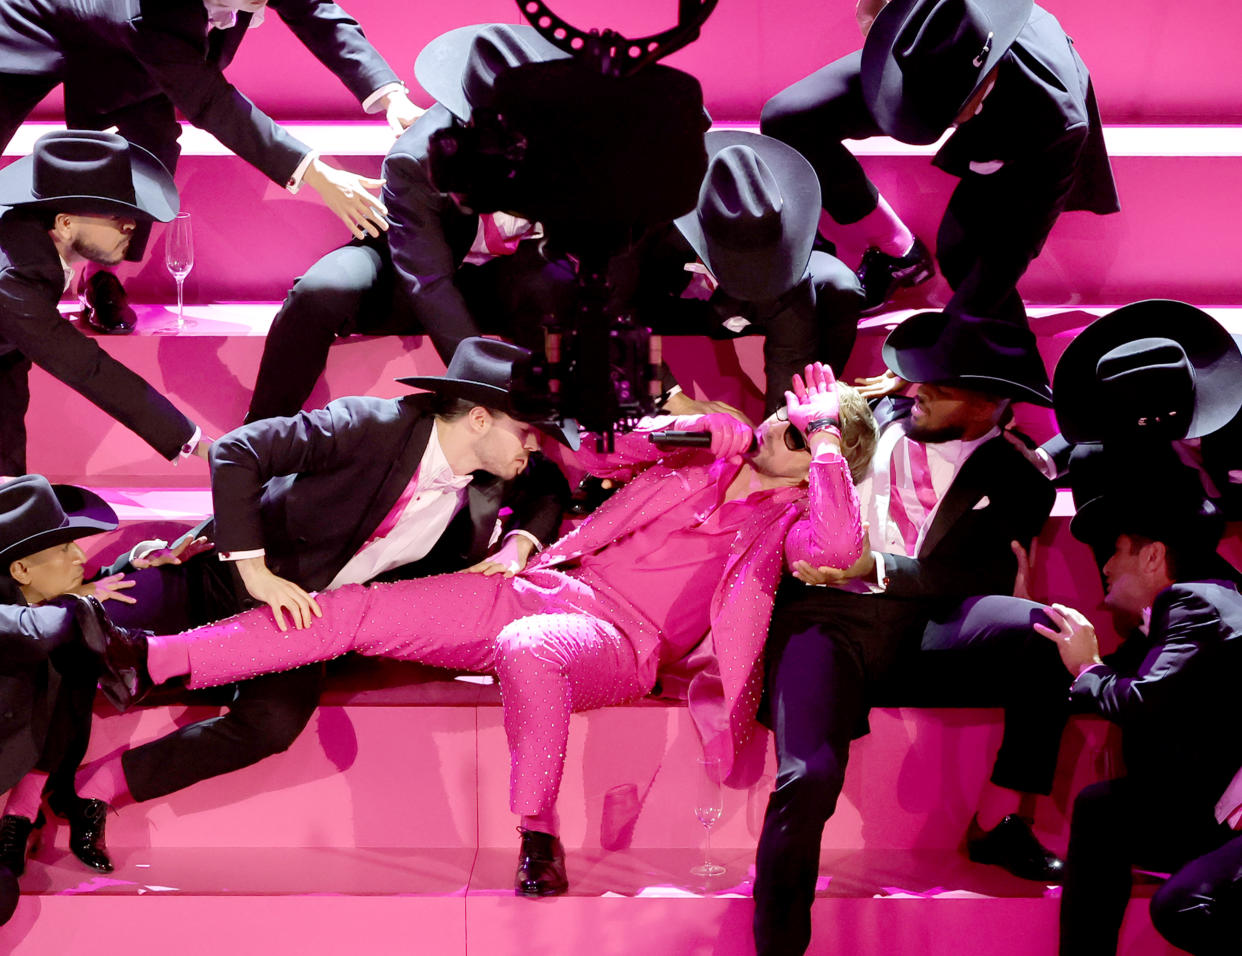 Ryan Gosling performs I'm Just Ken from Barbie during the 96th Academy Awards in Los Angeles on Sunday.